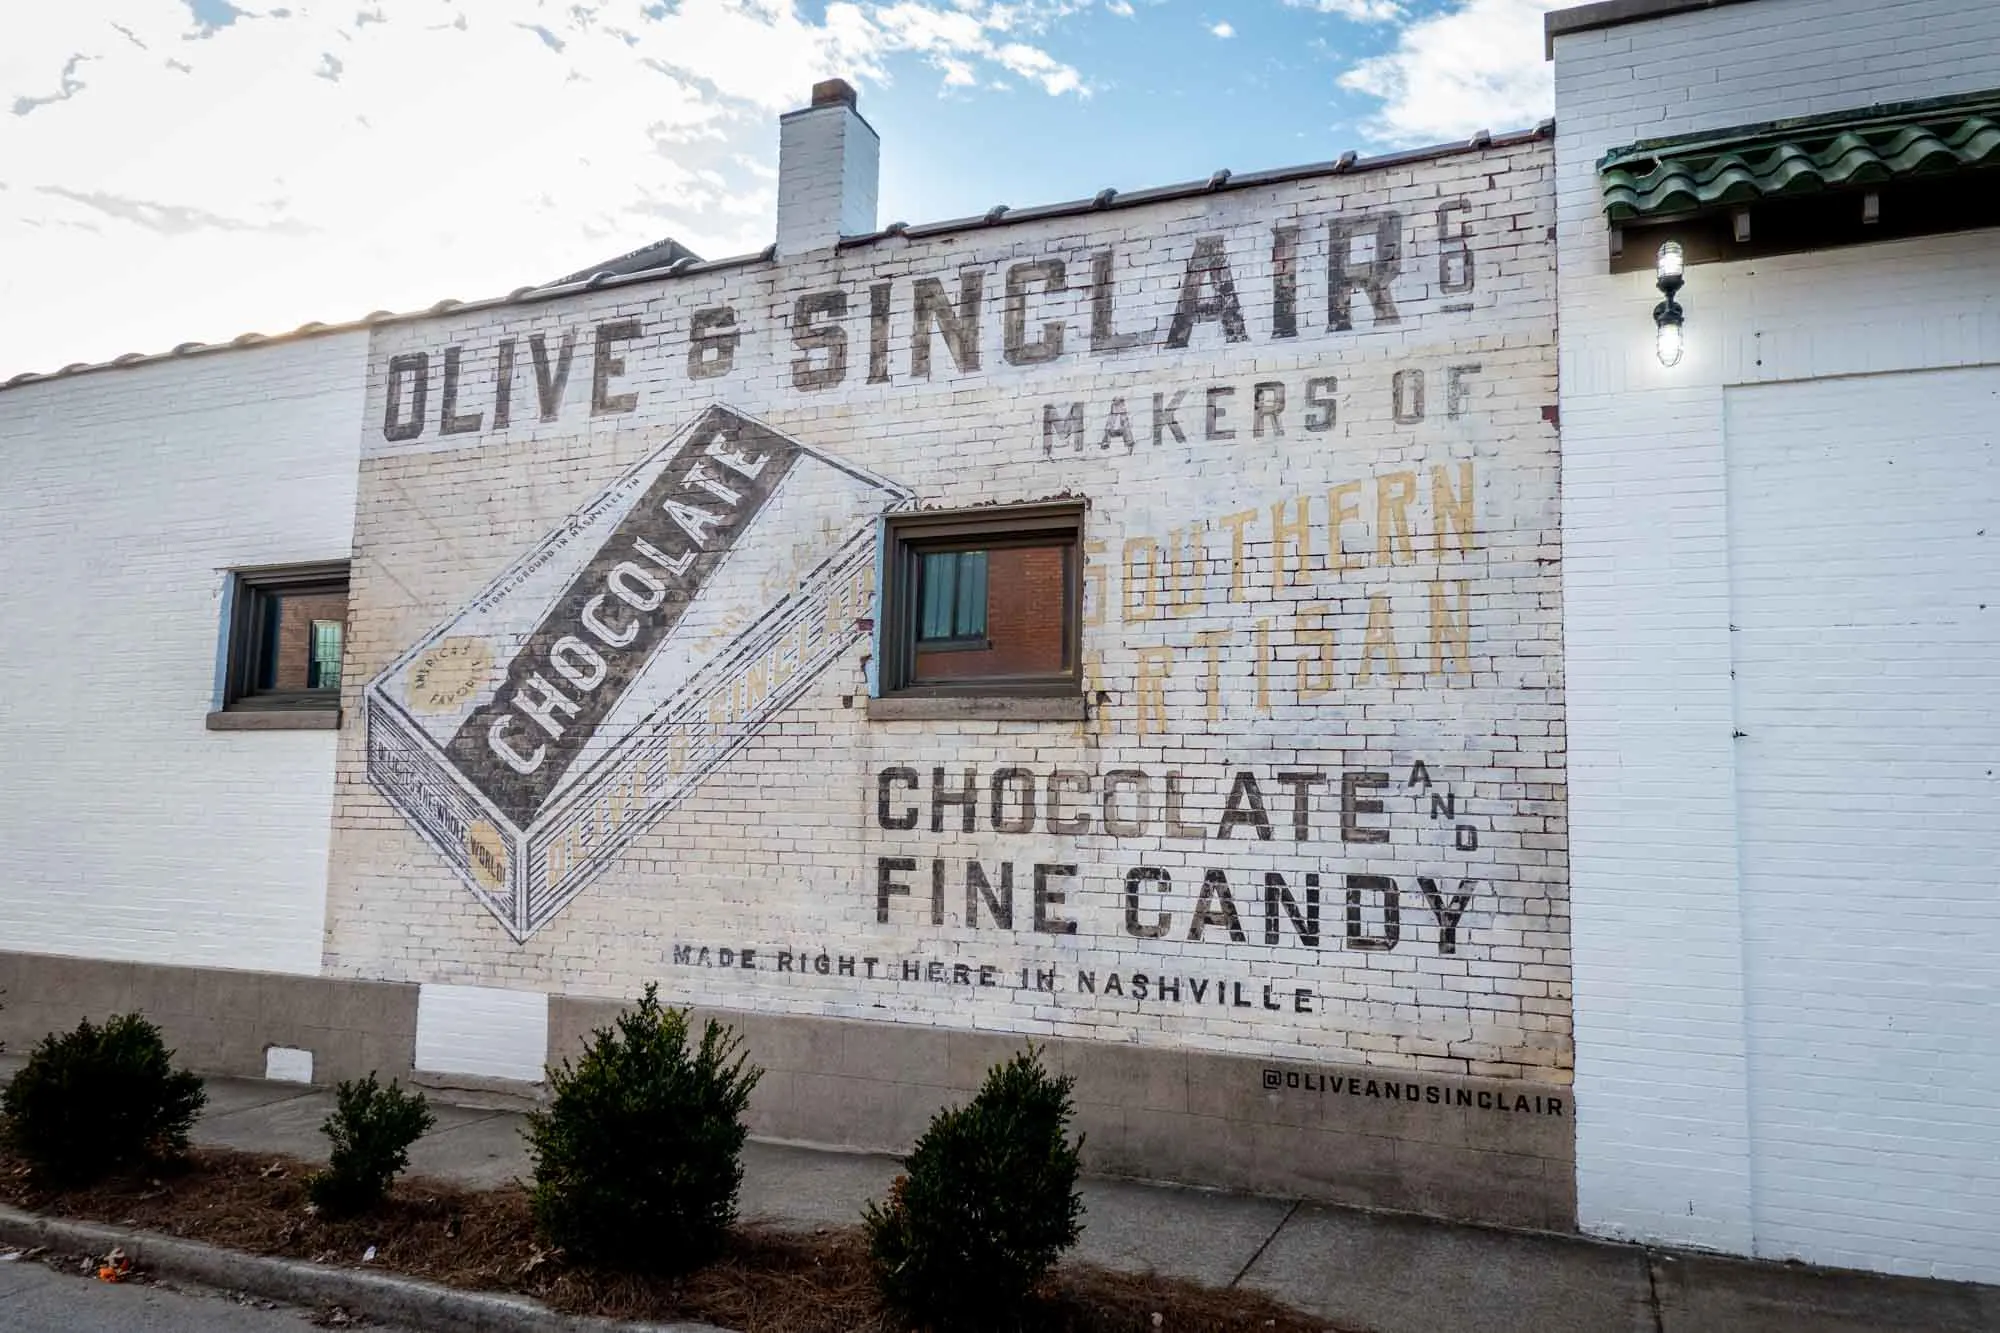 White brick wall painted with an old fashioned advertisement for "Olive & Sinclair Co., Makers of Southern Artisam Chocolate and Fine Candy Made Right Here in Nashville."